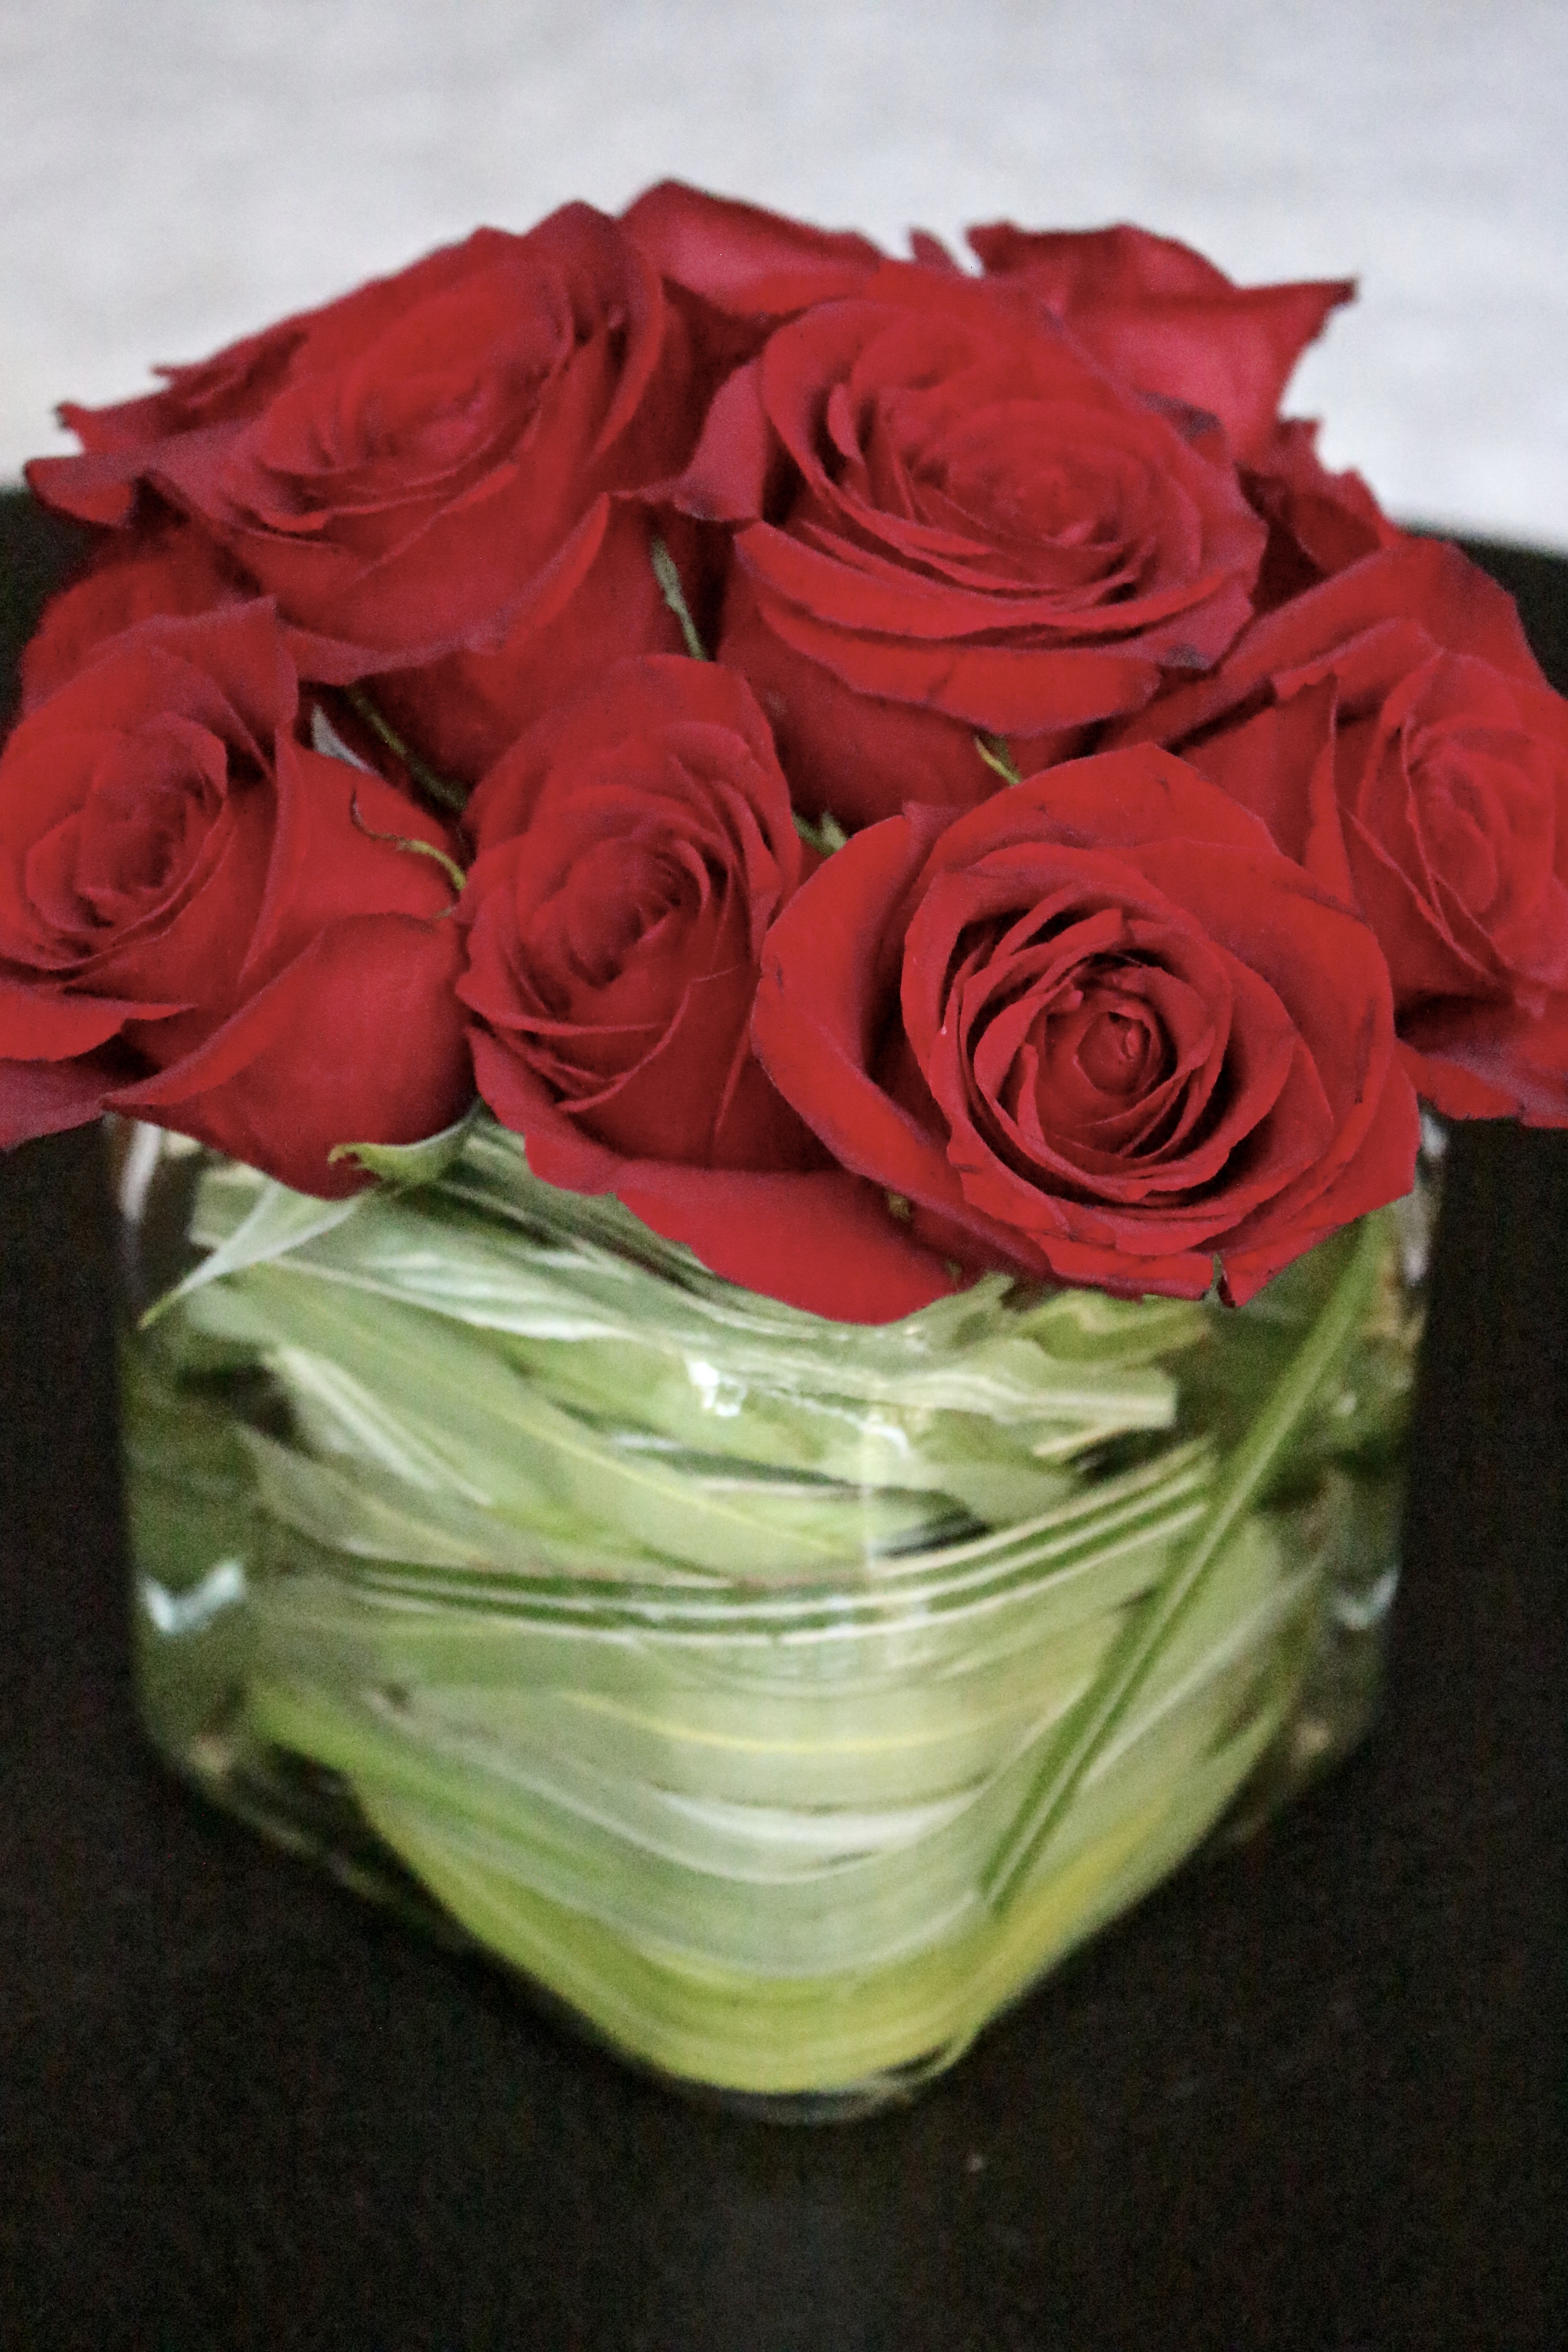 Run for the Roses Flower Arrangement | red roses | flower arranging | rose arrangement | simple flower arranging | hand bouquet | using grocery store bouquets